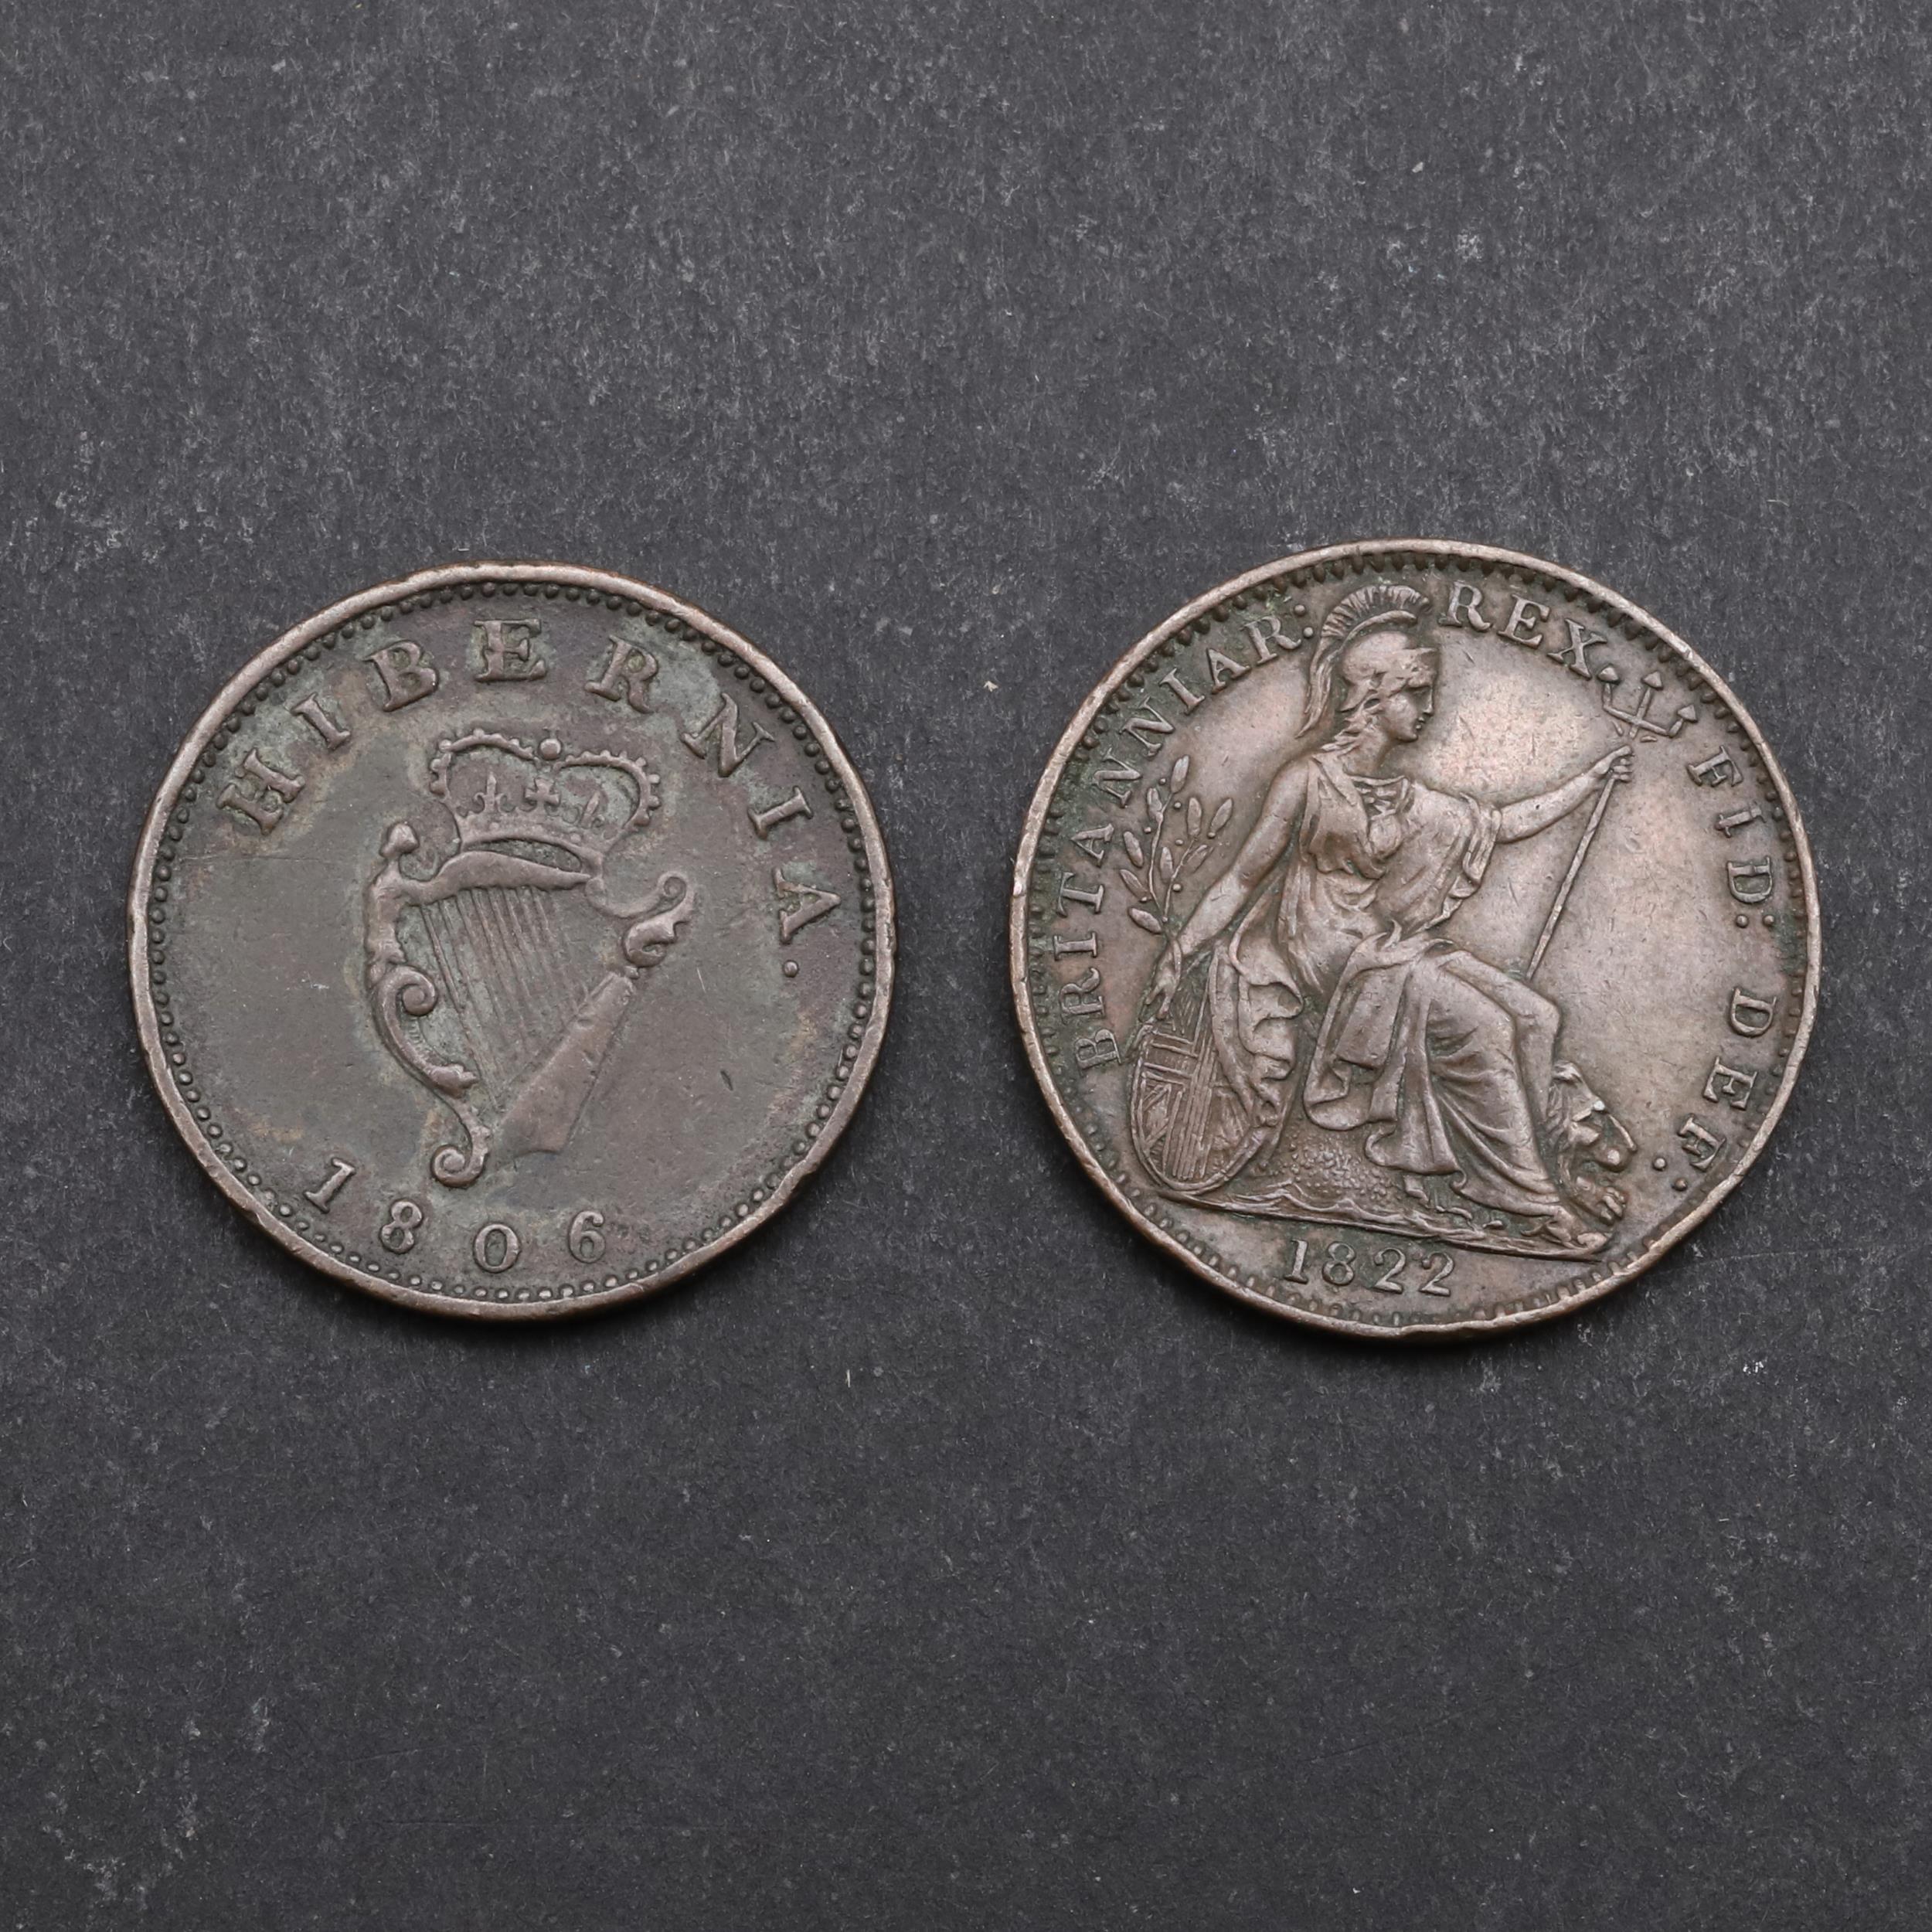 GEORGE III AND GEORGE IV FARTHINGS, 1806 AND 1822. - Image 2 of 3